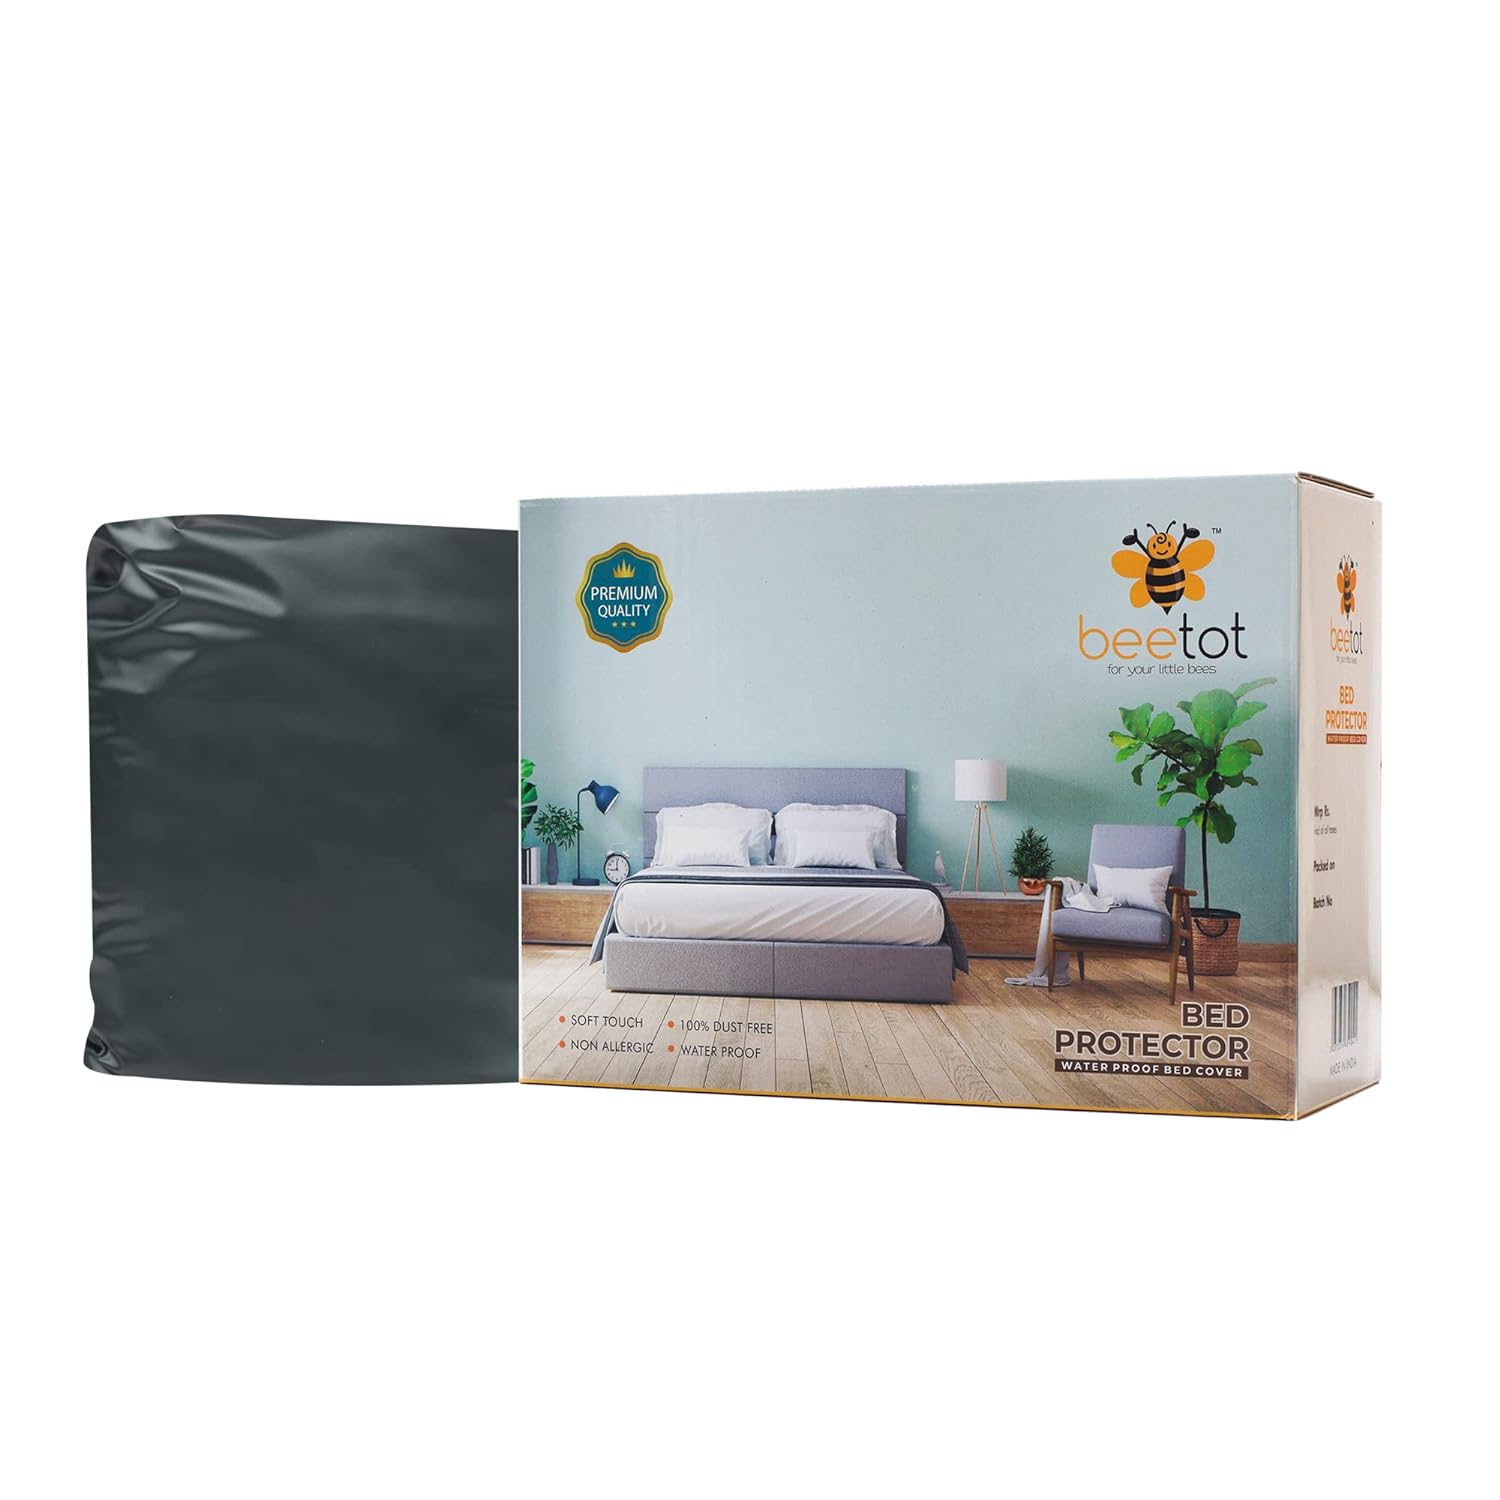 PVC Water Proof and Dust Proof Double Bed Cover, Mattress Protector, Non-Toxic Bed Protector, Mattress Cover (Green)